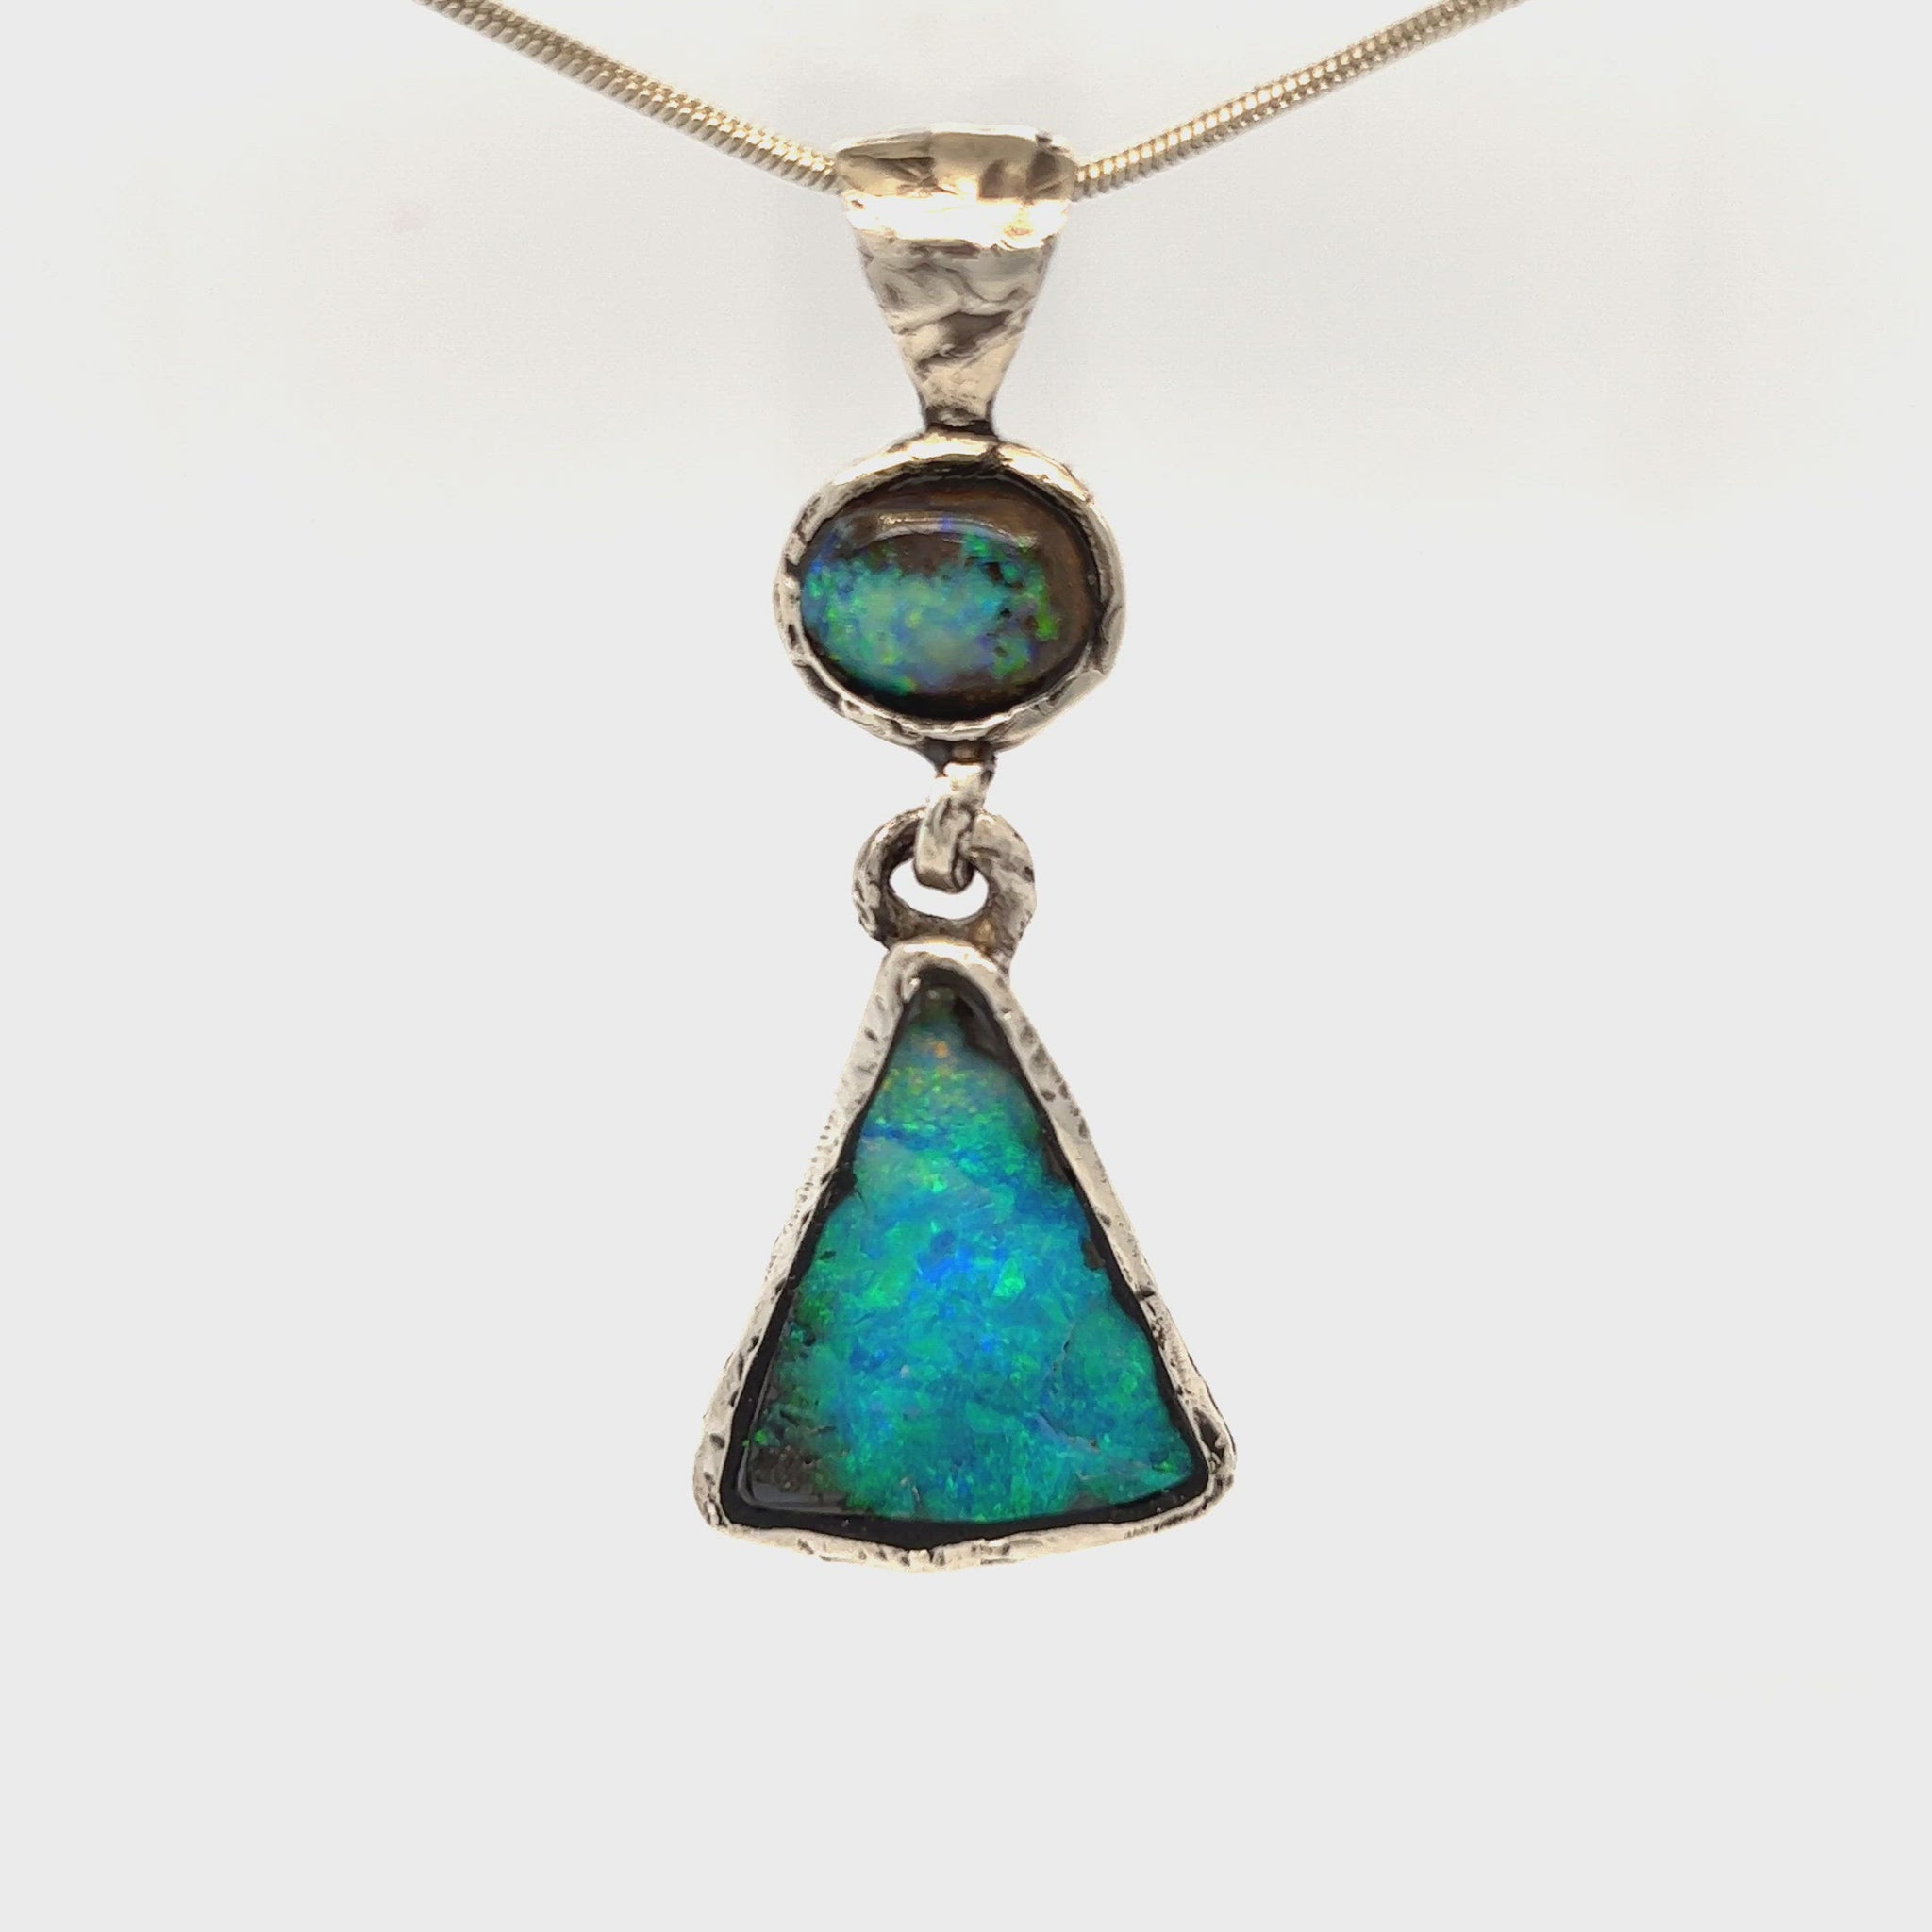 Stunning one-off hand made solid Boulder opal pendant. Hinged between stones to allow movement. Highly textured to enhance rawness. Made with Argentium silver, which has a higher silver content using part recycled silver, and a lower allergenic. Crafted by Sally Fisher.